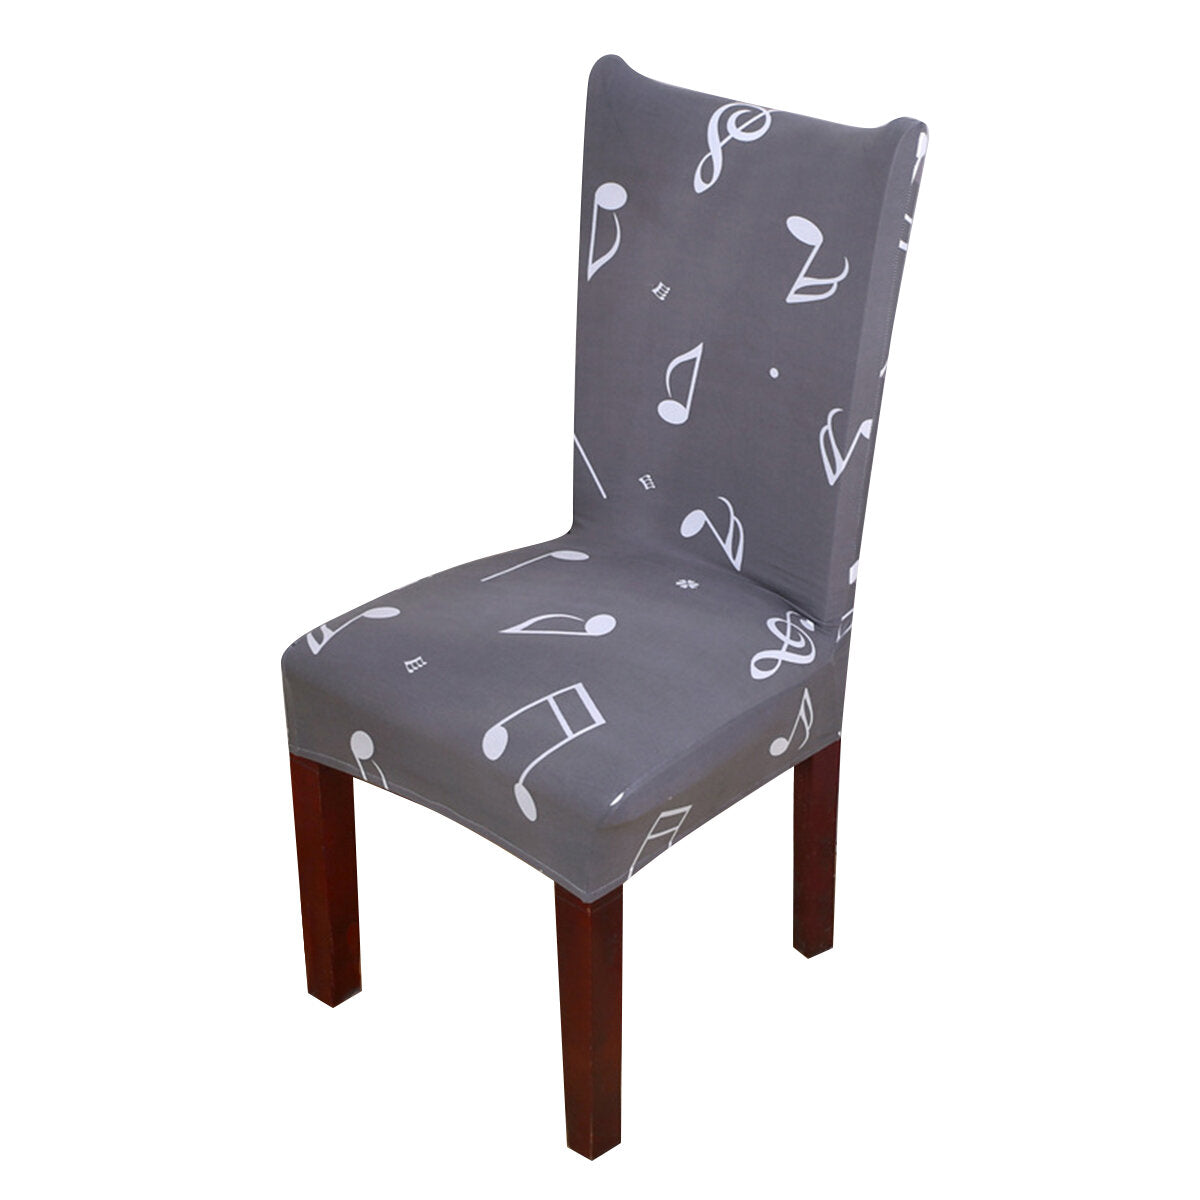 Elastic Chair Cover Stretch Dining Chair Seat Slipcover Office Computer Chair Protector Home Office Furniture Decor